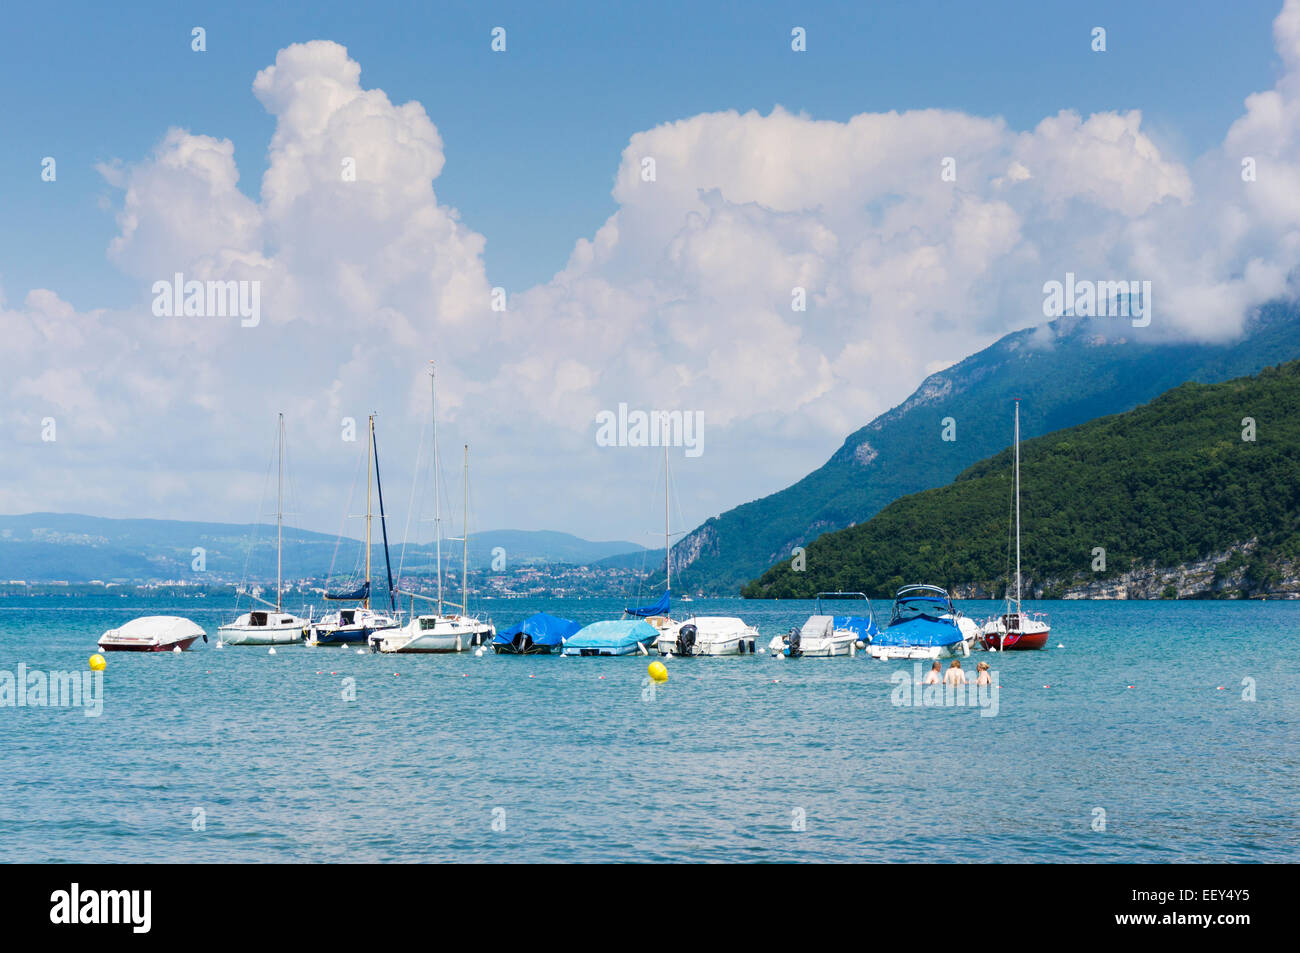 Boats and swimmers on Lake Annecy, Haute-Savoie, France, Europe Stock Photo